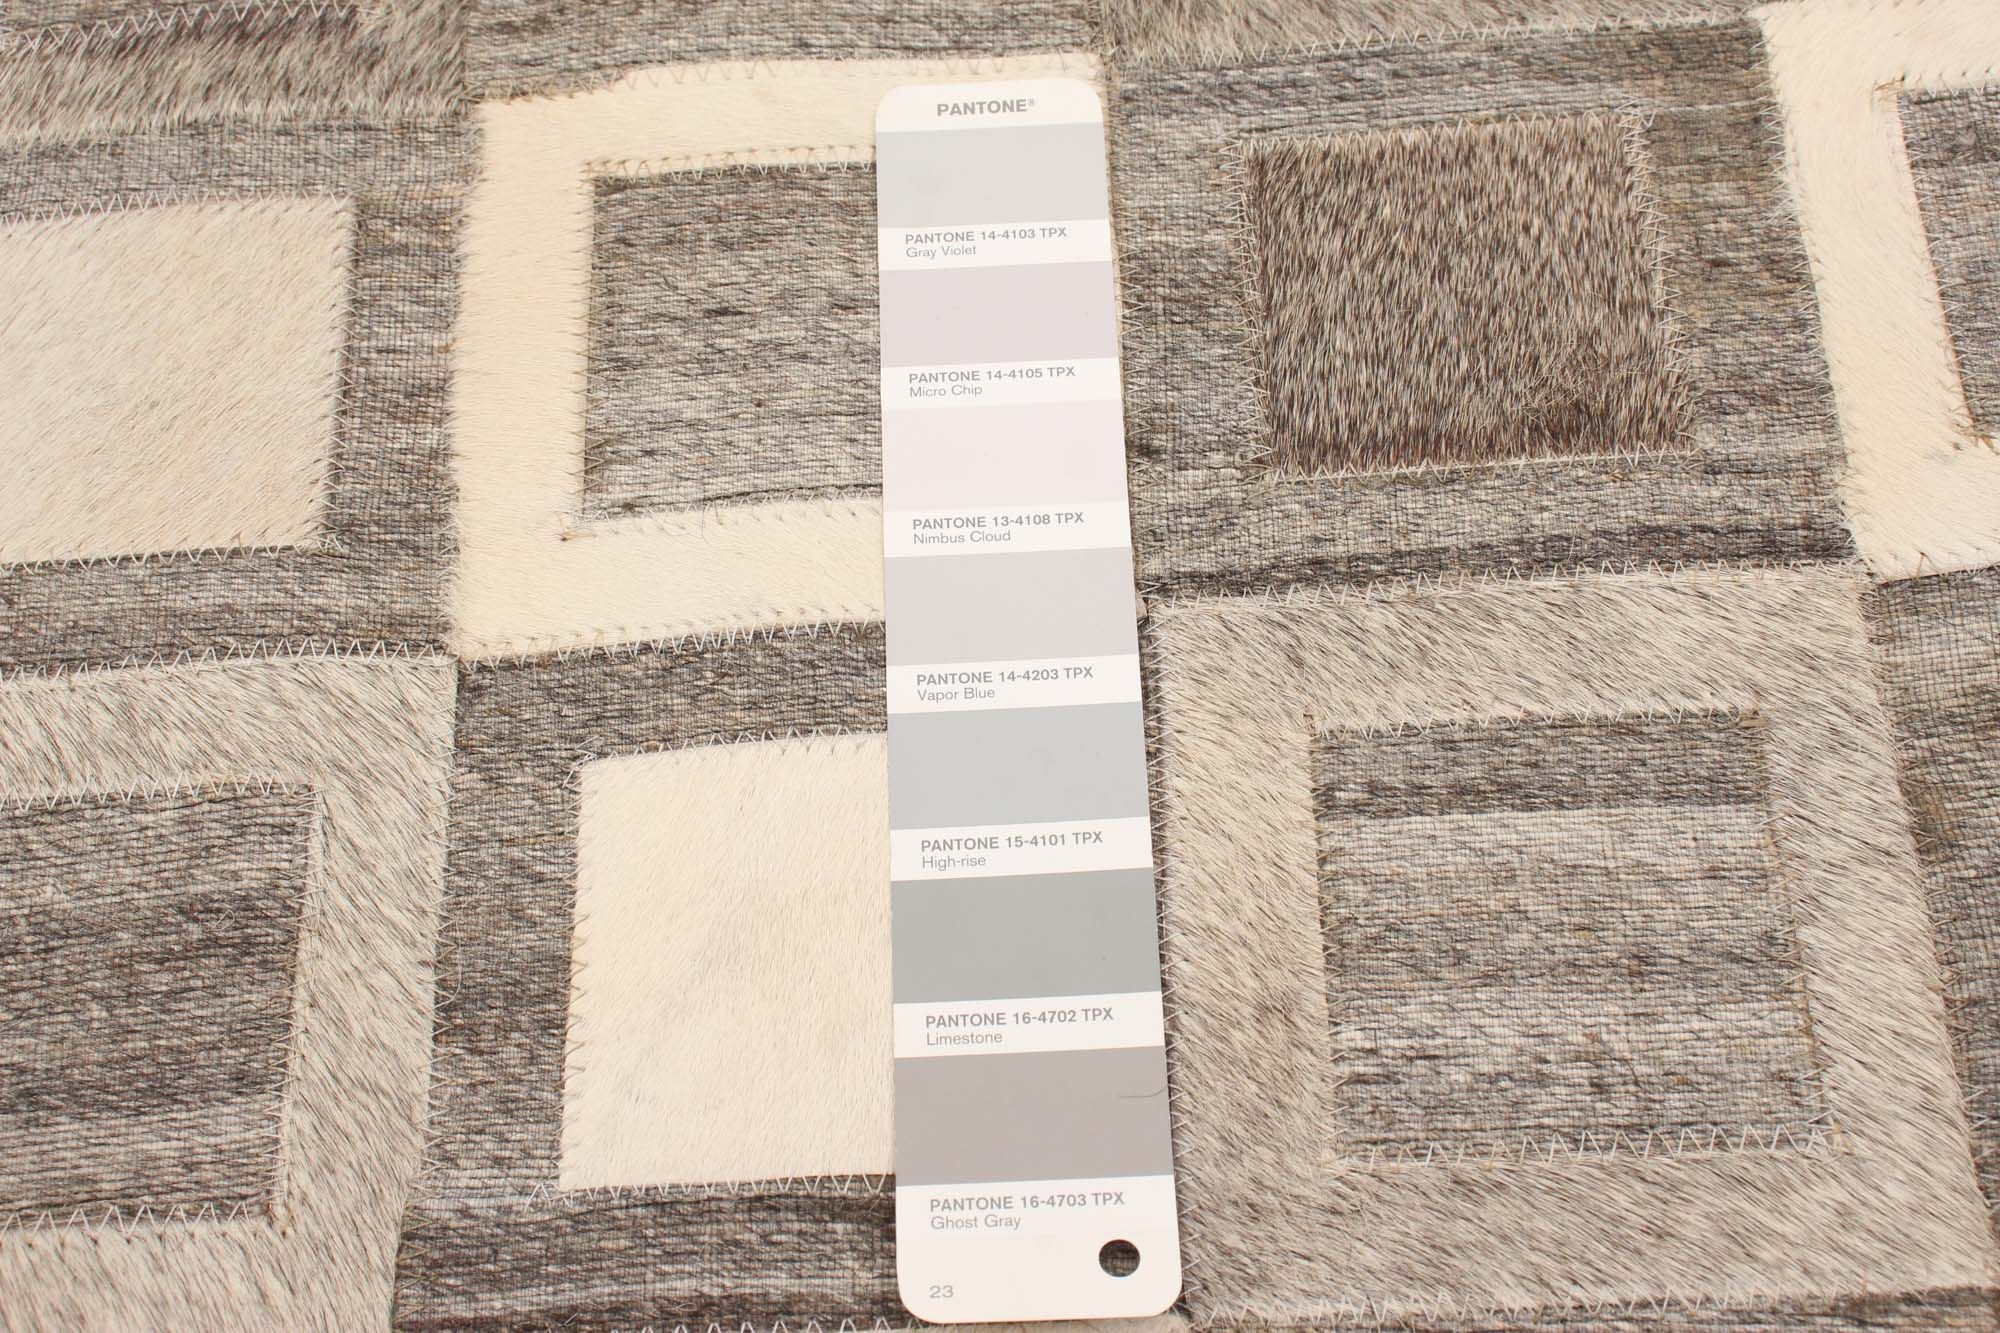 Cowhide Patchwork Accent Grey Rug 4'4 x 6'9 Area Rug for Living Room Bedroom eCarpet Gallery Hand-Knotted 340314 